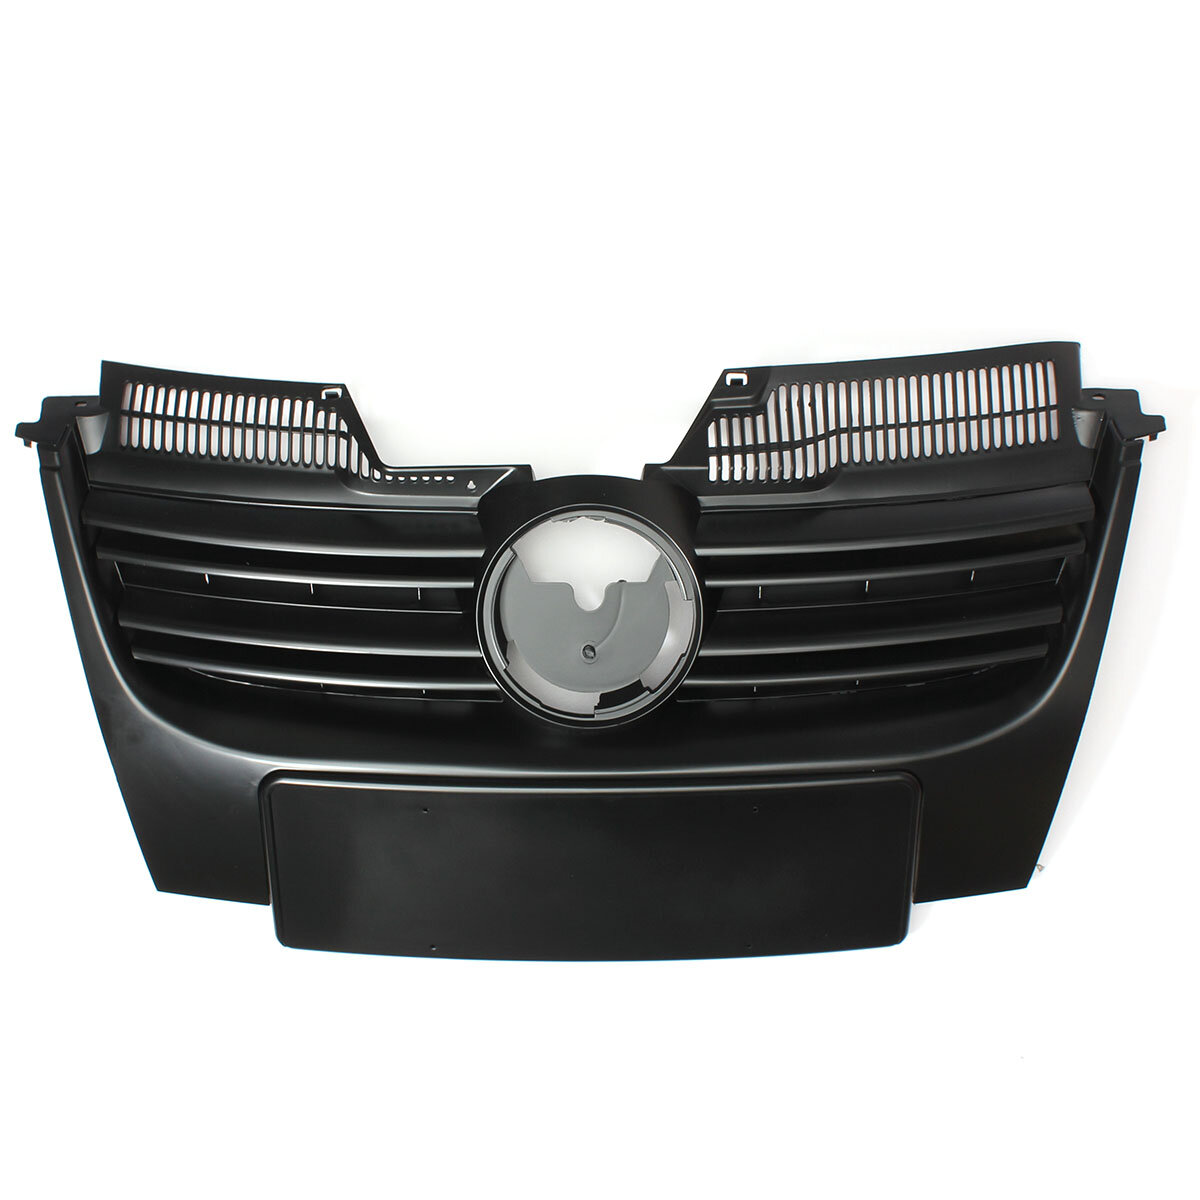 New Front Black Upper Bumper Sport ABS Grille Grill For 2006-2010 VW Jetta MK5